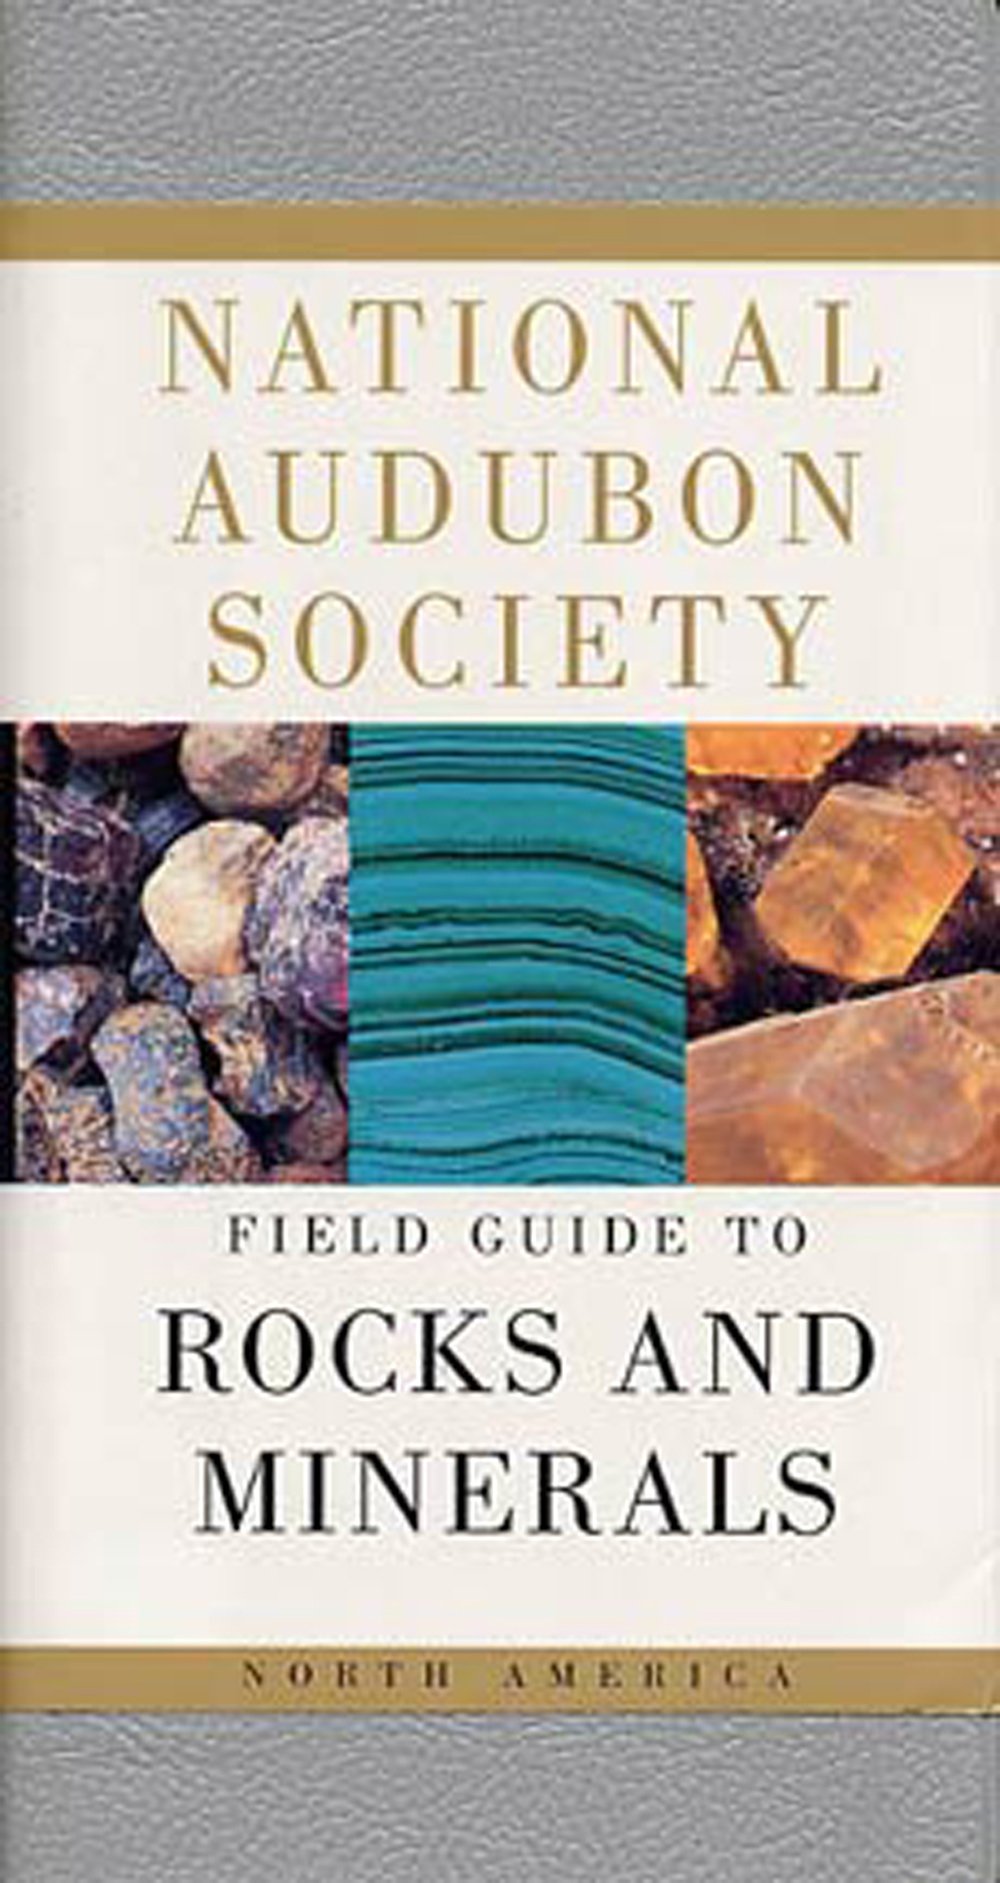 Field Guide to Rocks and Minerals (National Audubon Society®)